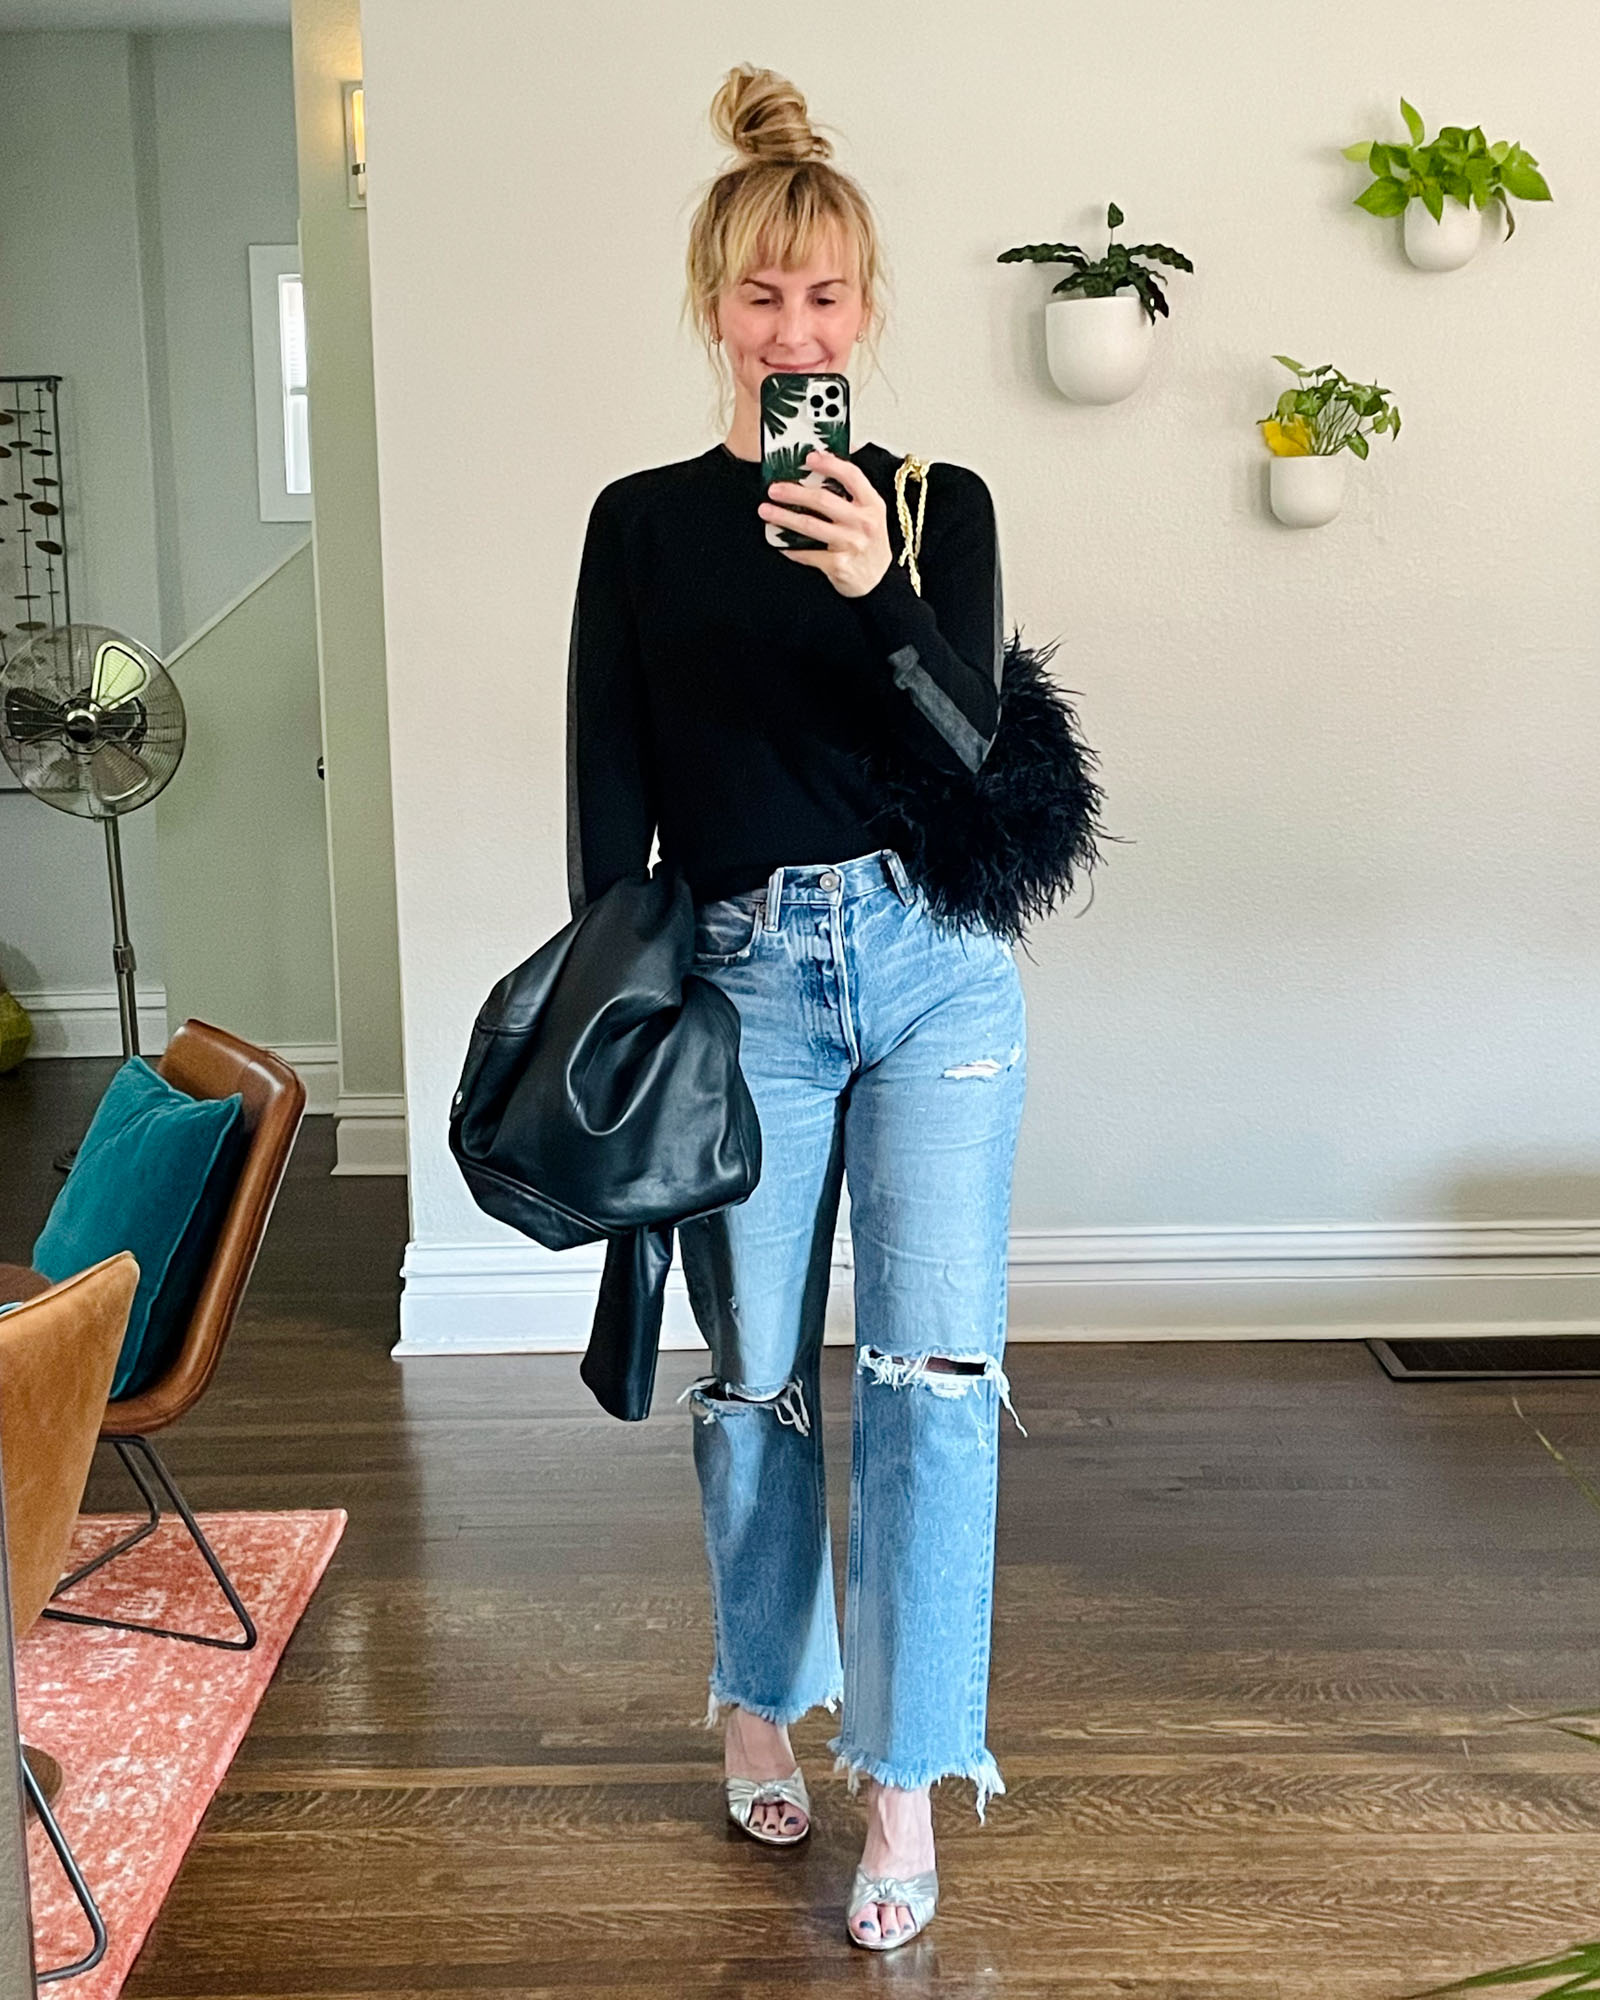 Wearing the Veronica Beard Ganita sandals with my Moussy jeans, a black cashmere Theory sweater, and my black Iro Haan leather jacket.